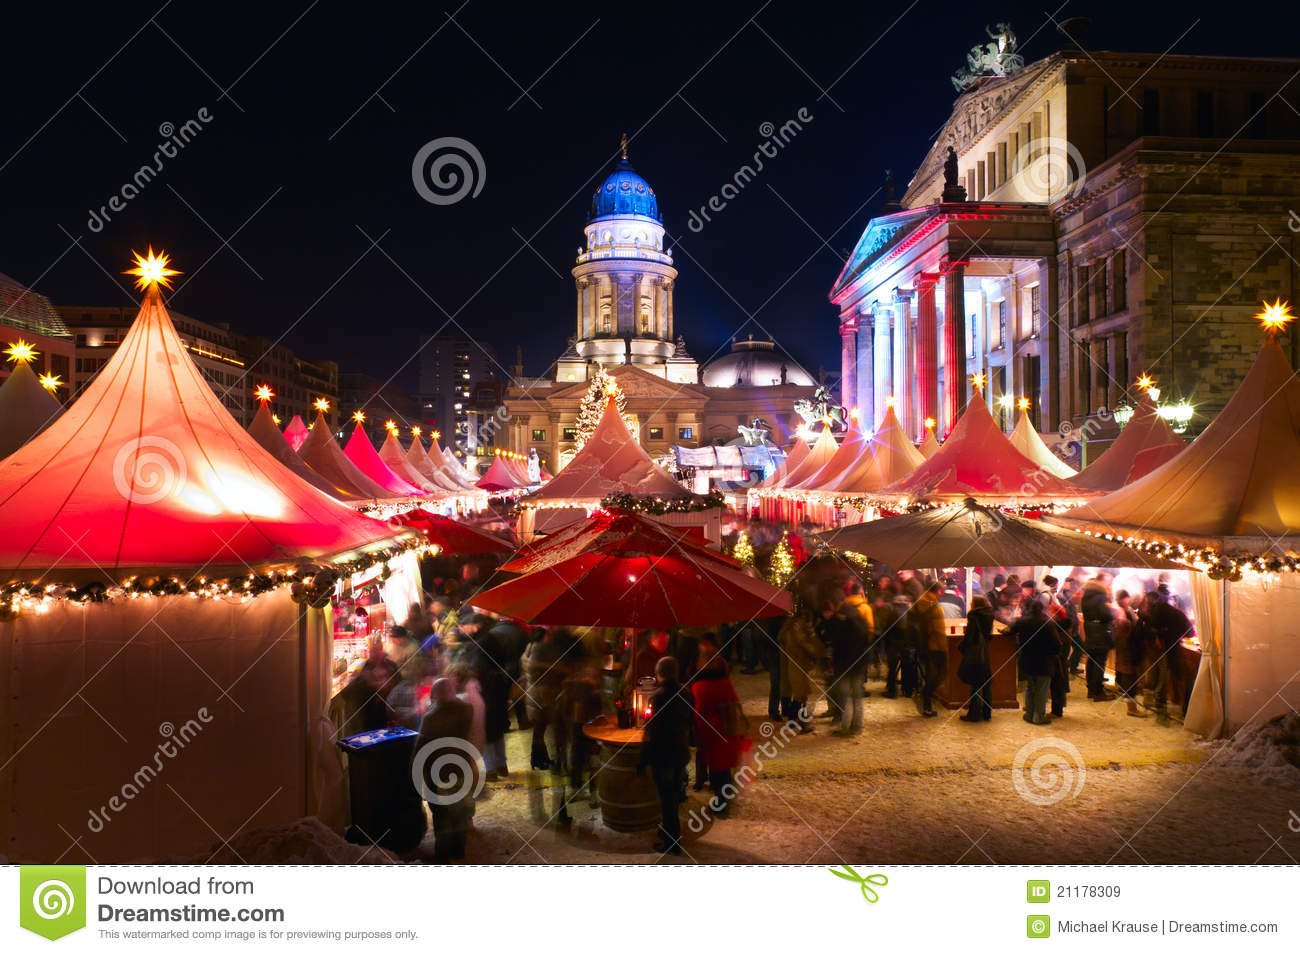 Christmas Market In Berlin Germany Royalty Free Stock Images   Image    